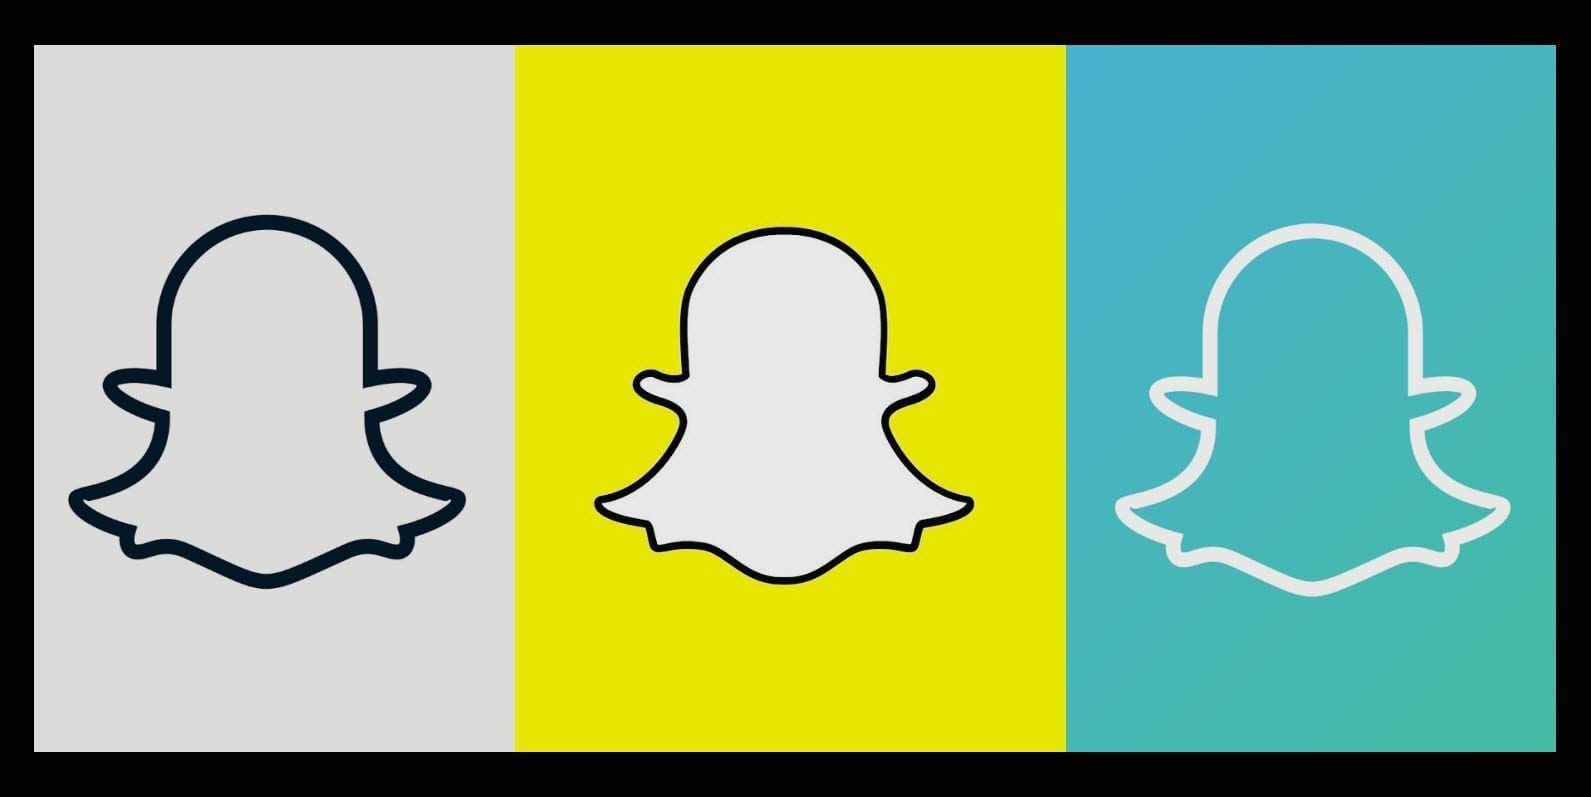 Snapchat Advertising: A History of Vertical Innovation